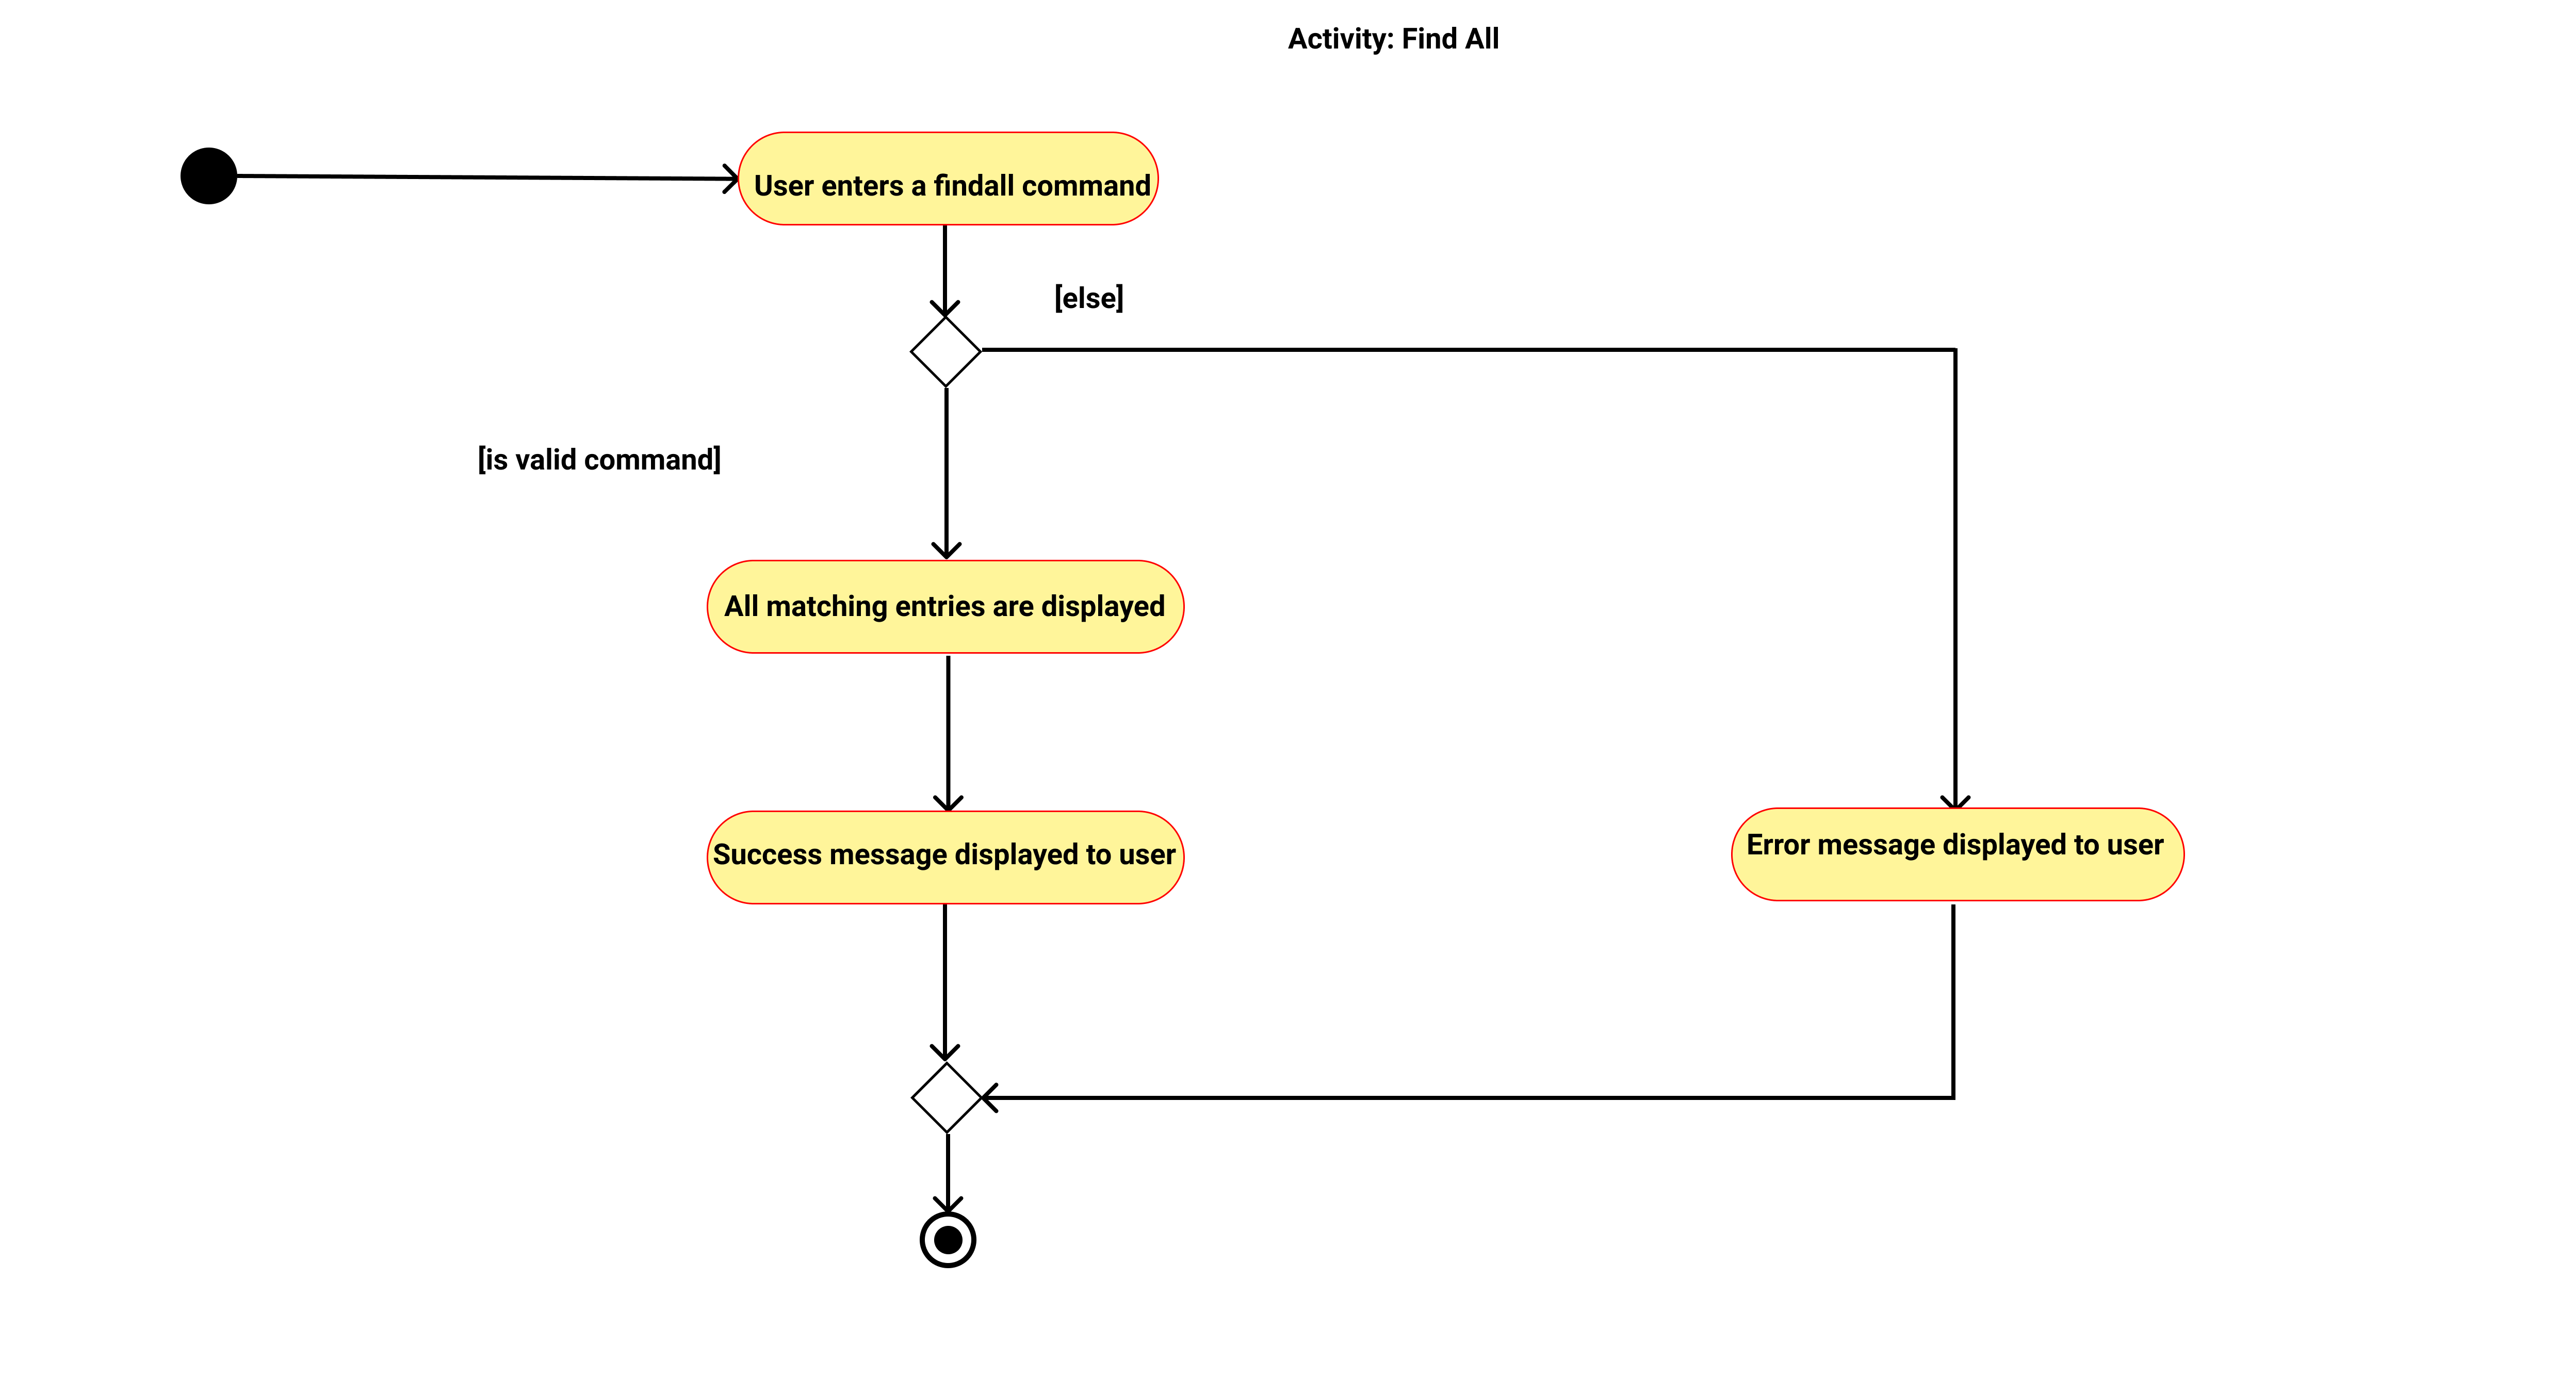 FindAll Activity Diagram